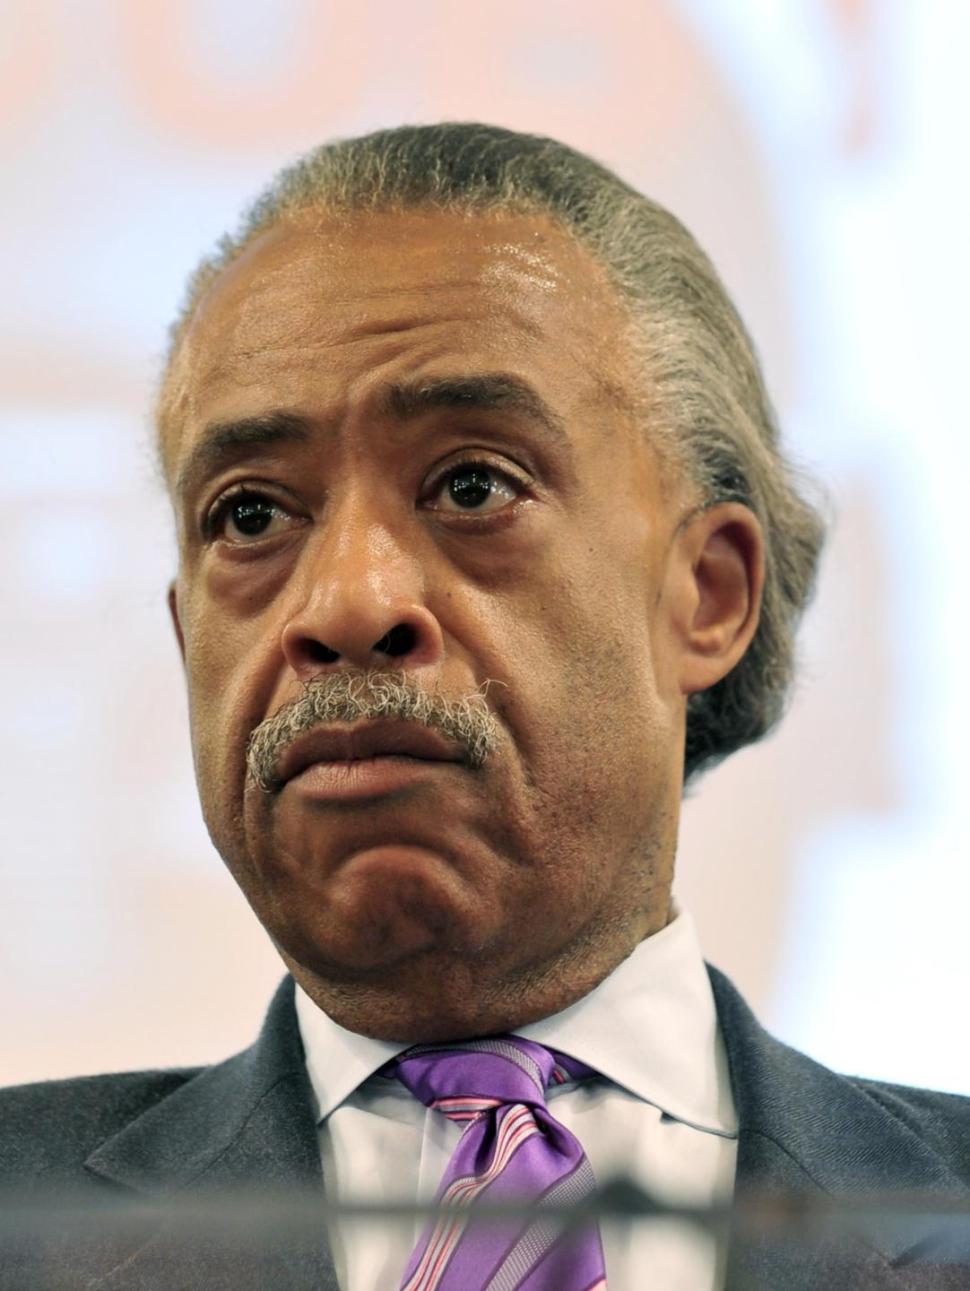 The Rev. Al Sharpton is outraged no black actors were nominated for an Academy Award.